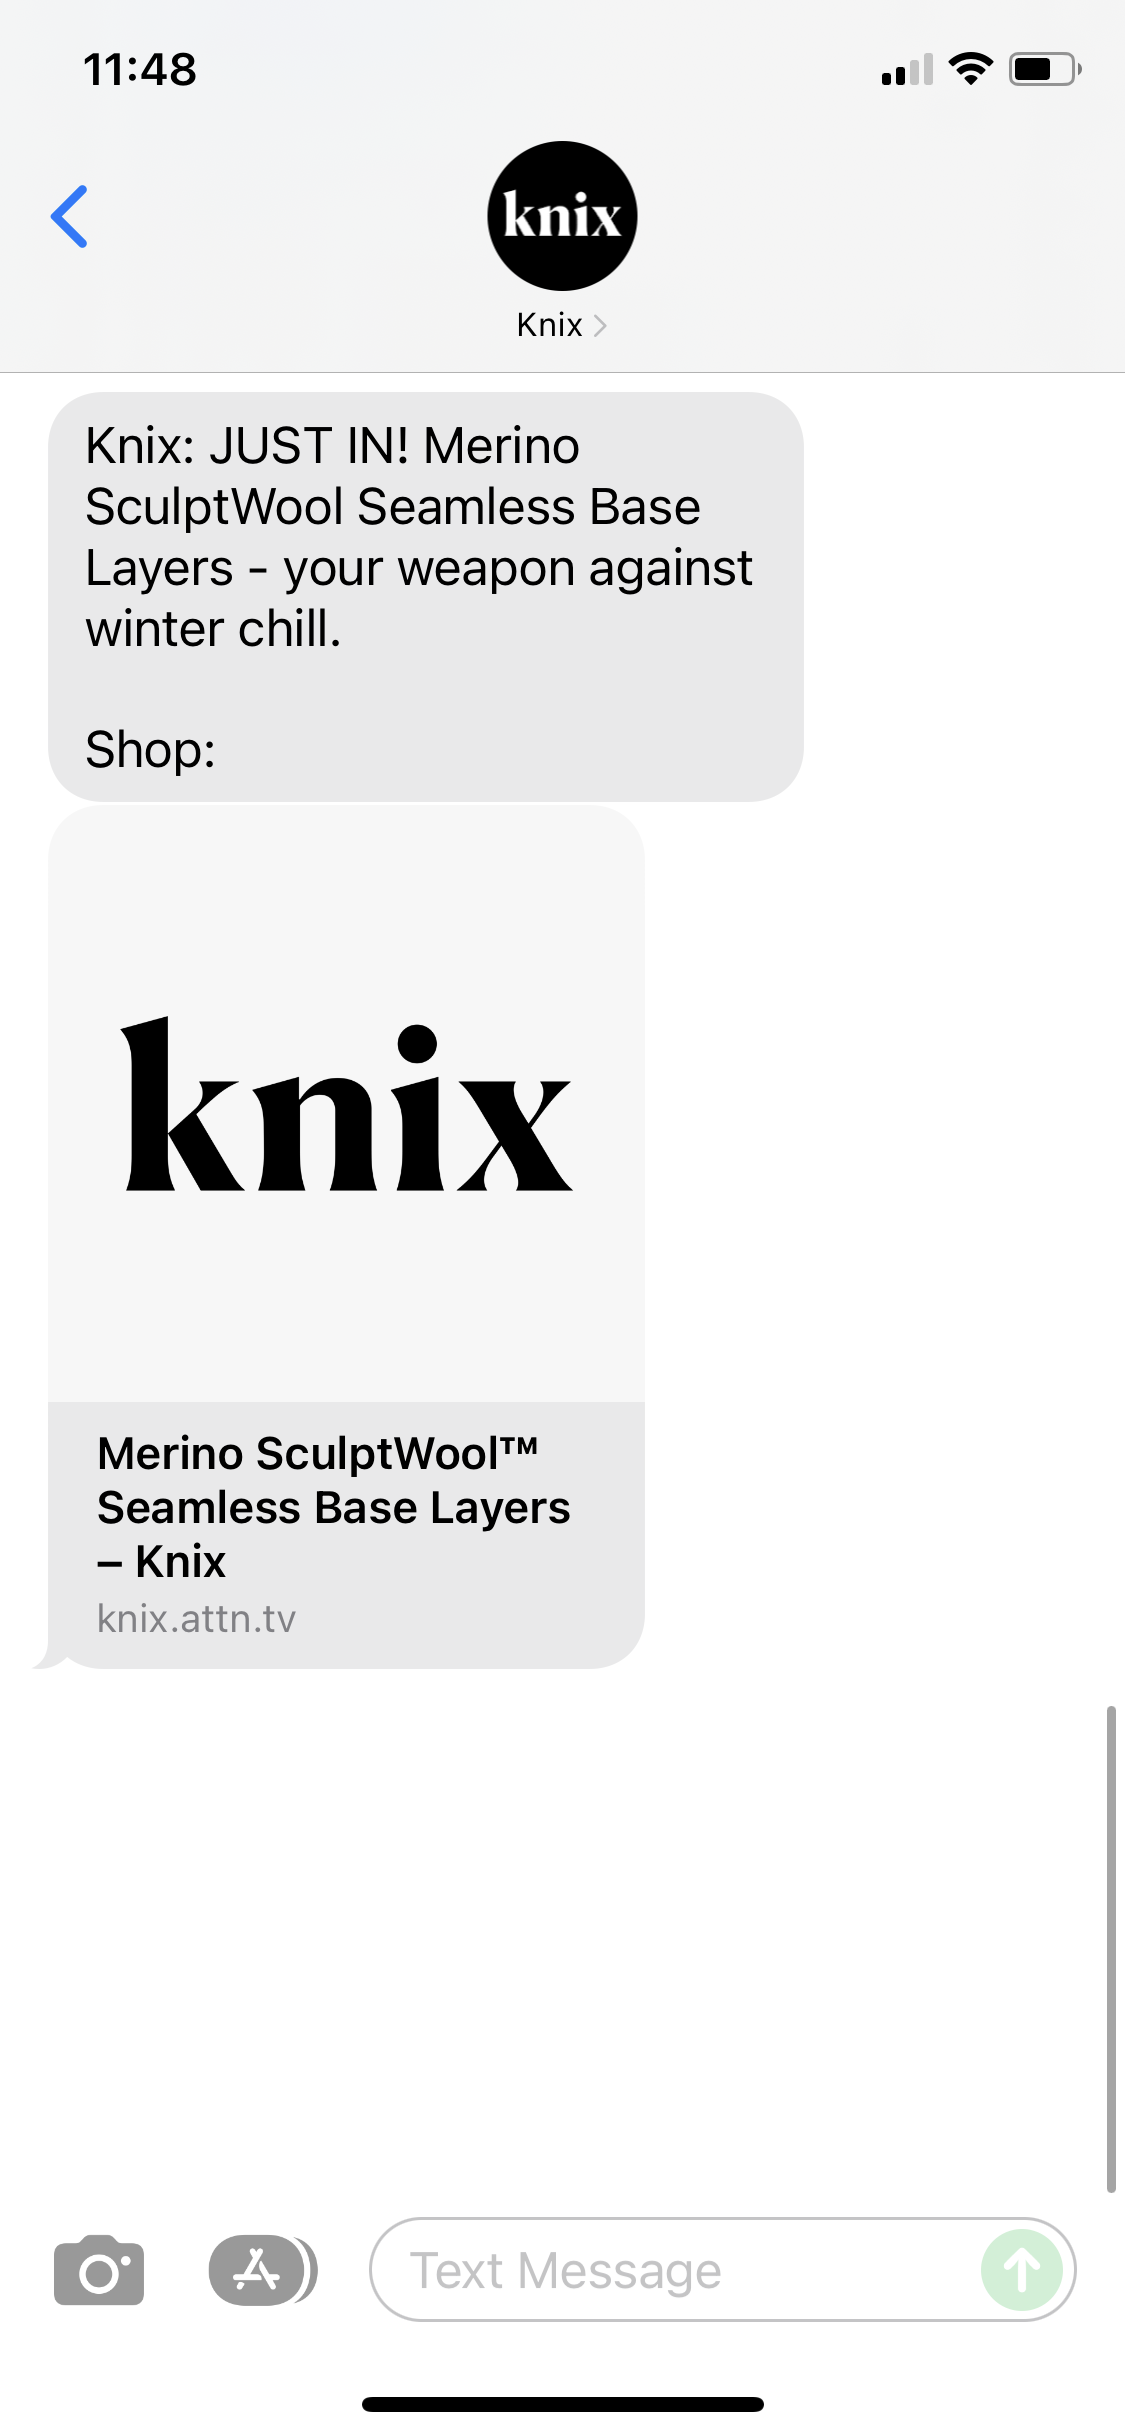 Knix Text Message Marketing Example – 11.08.2021